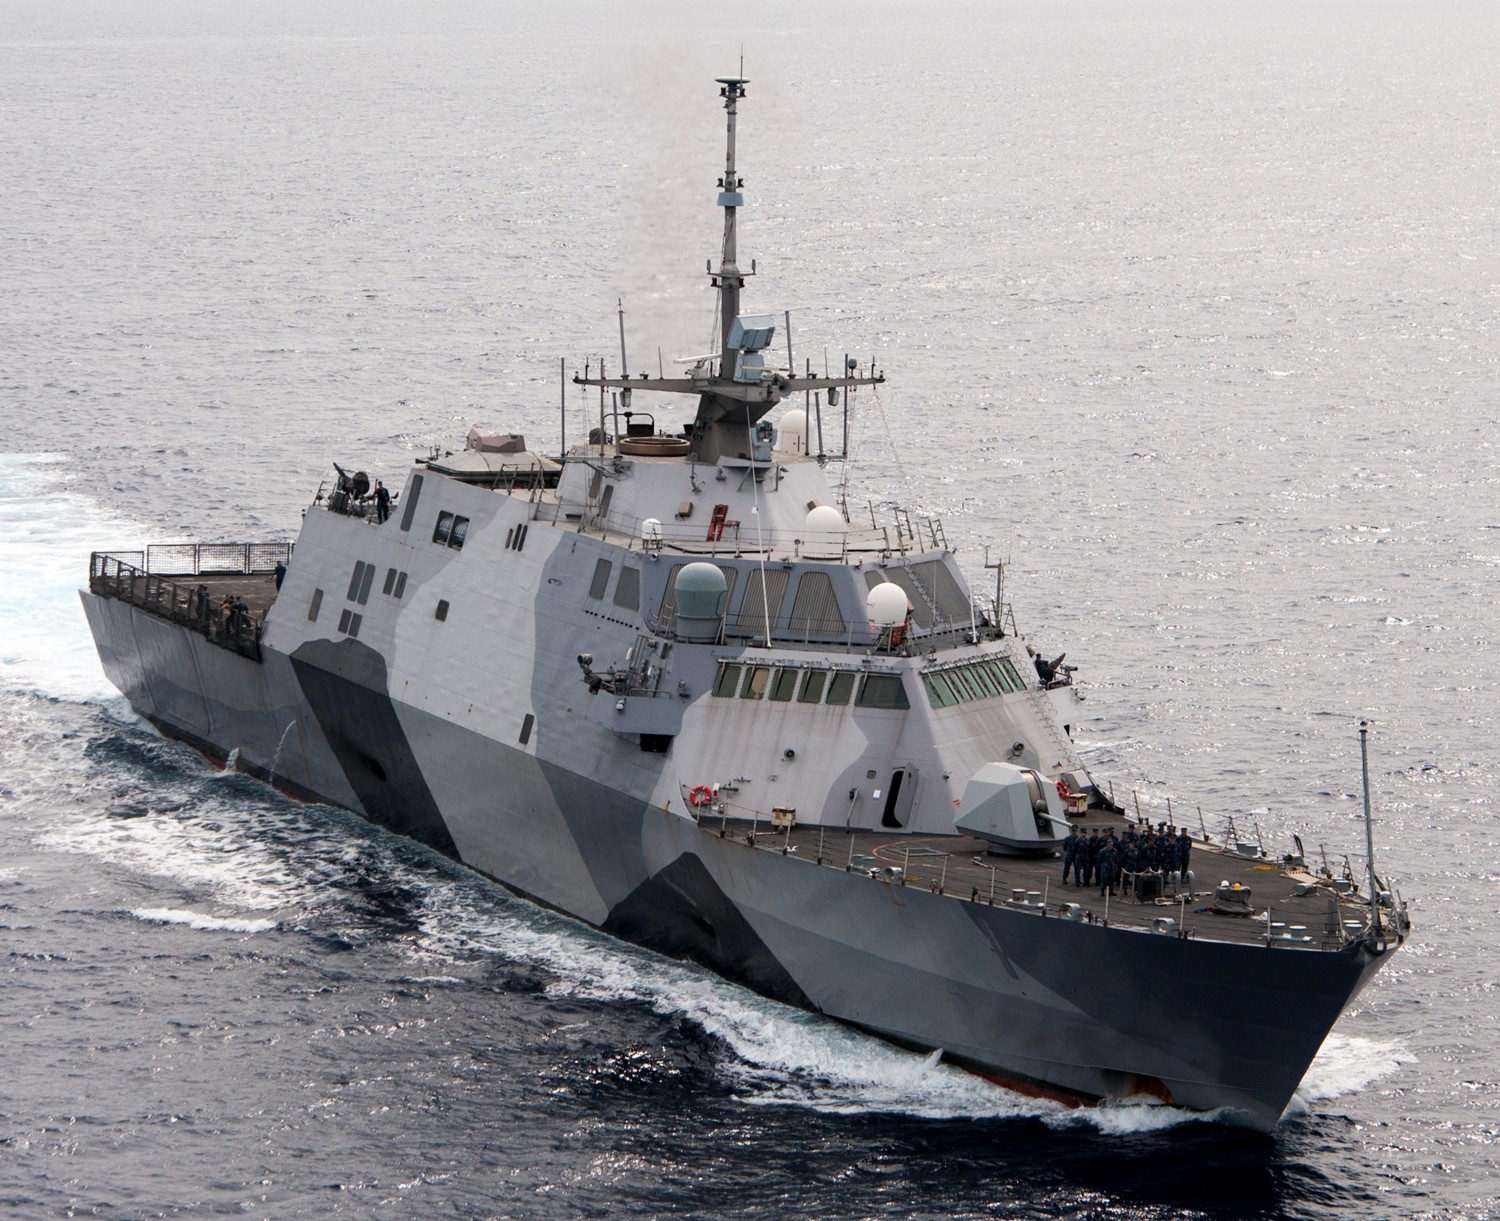 lcs-1 uss freedom class littoral combat ship us navy 15